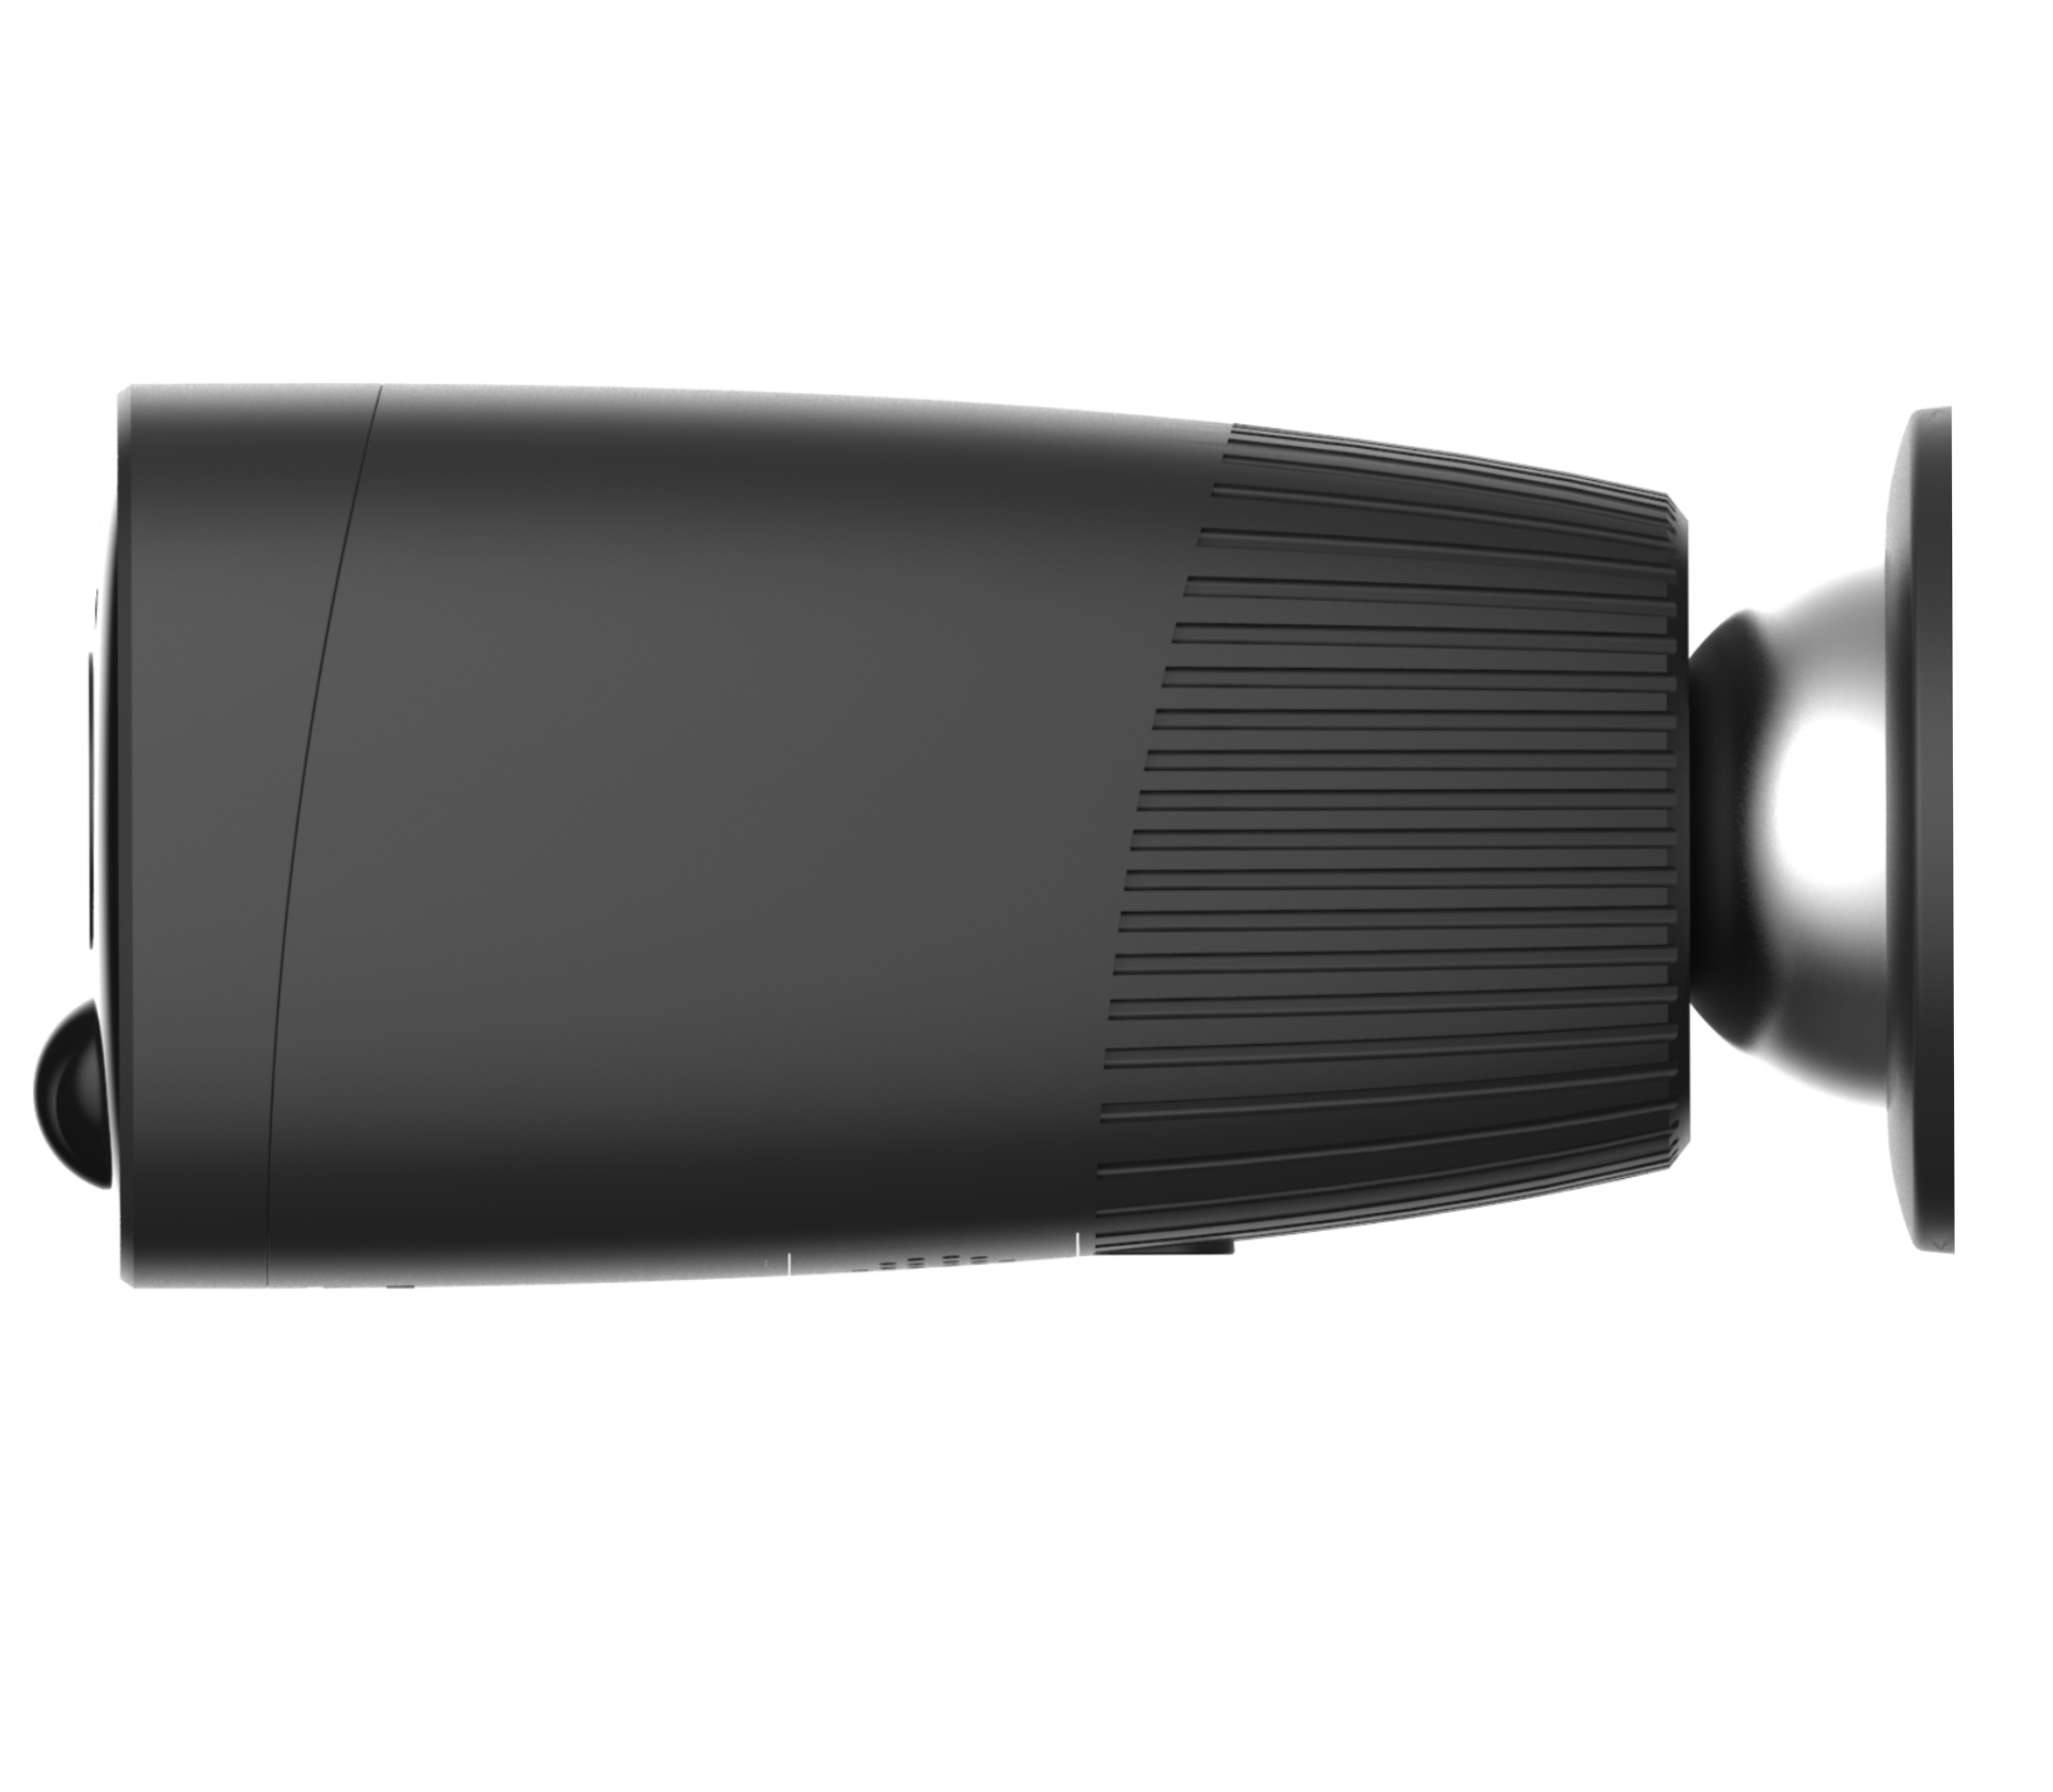 rok-battery-camera-side-view4.png